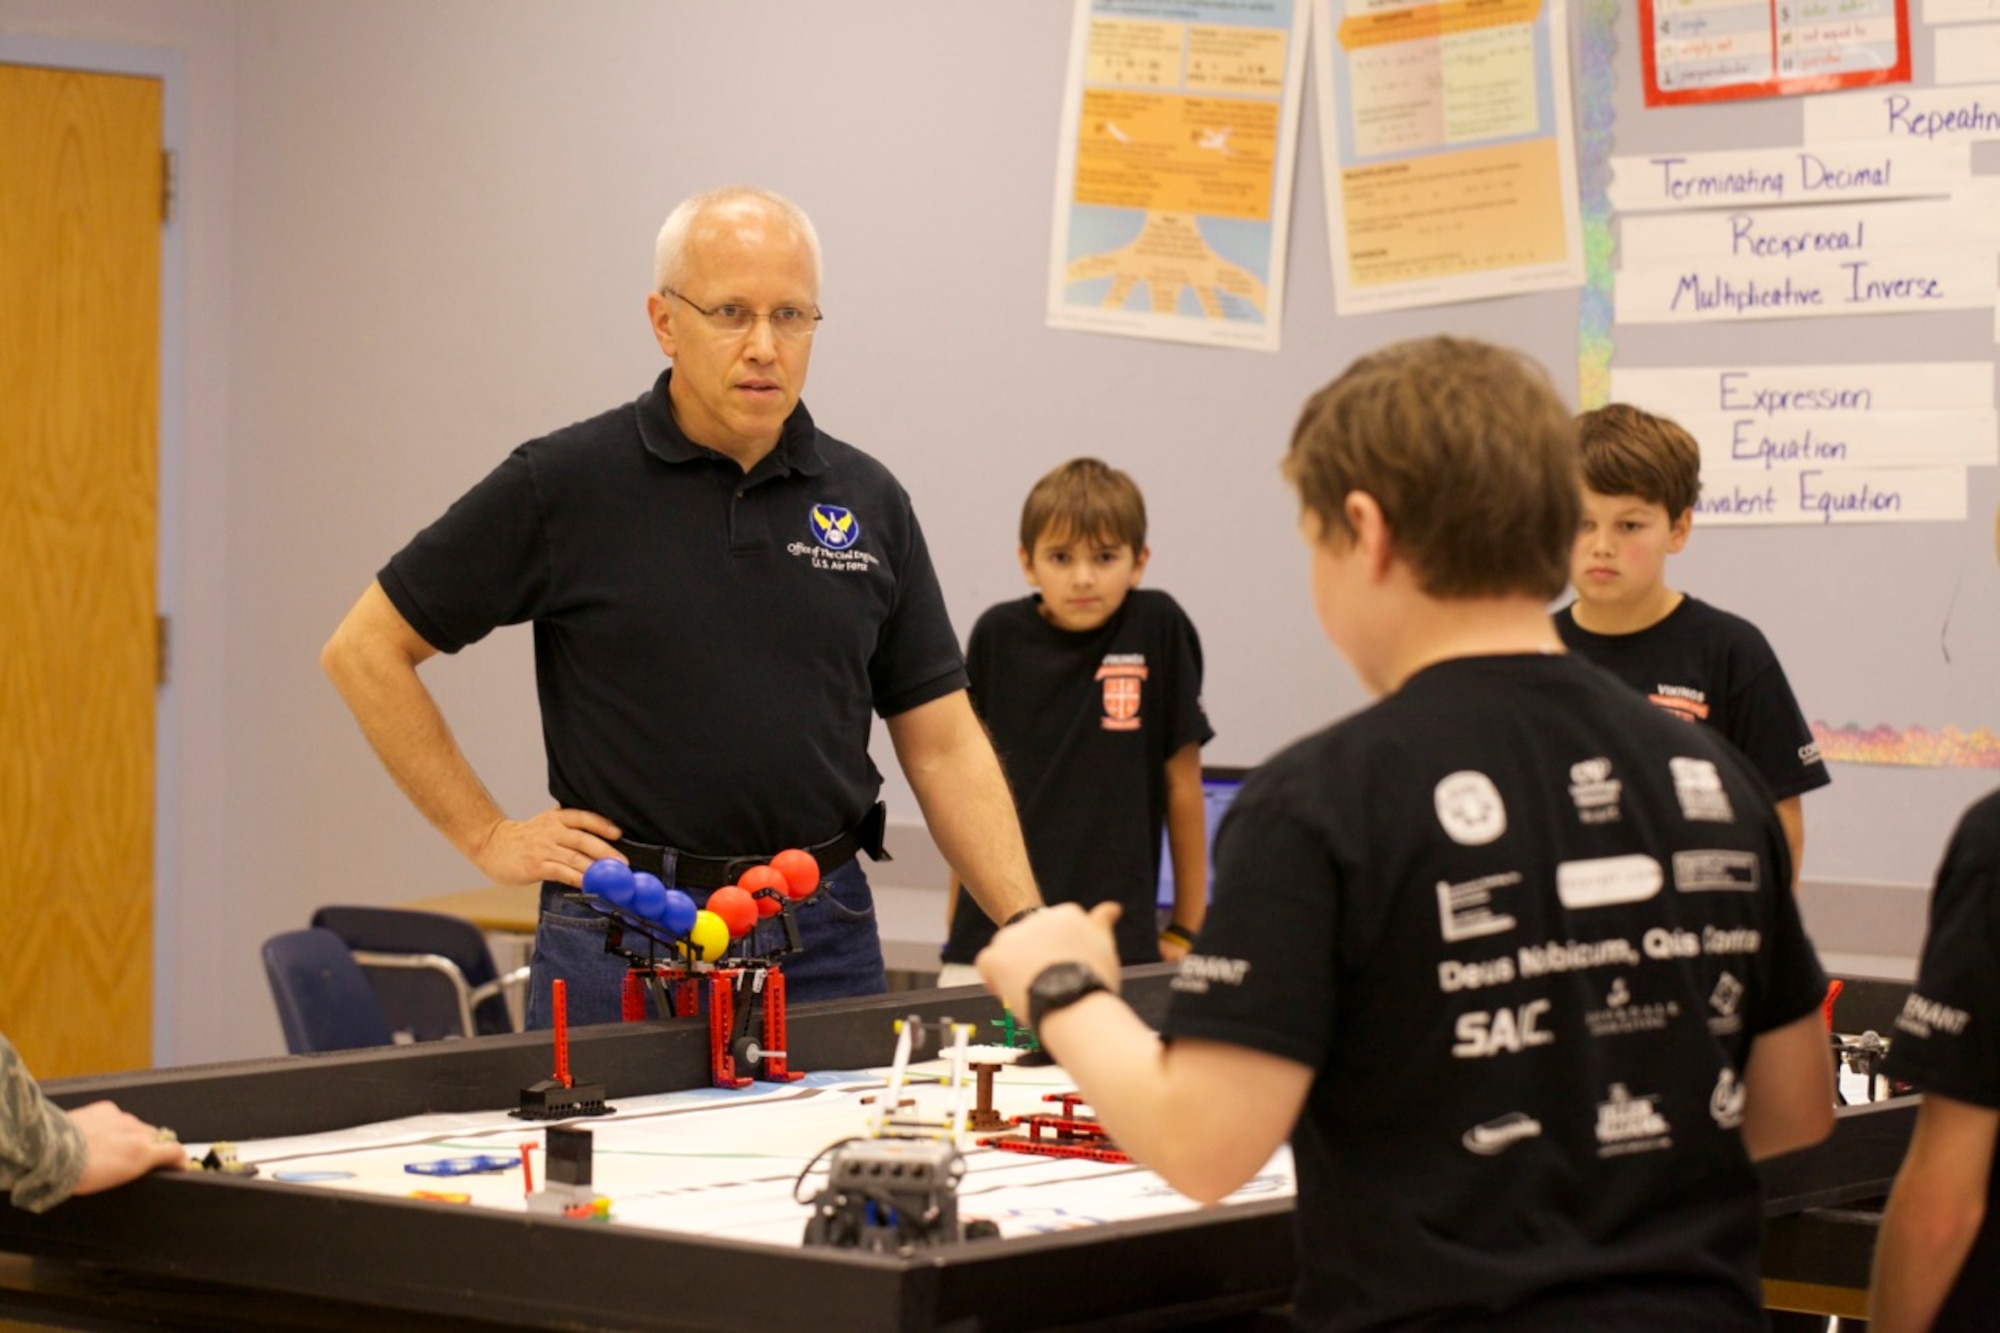 PANAMA CITY, Fla. -- Air Force Civil Engineer Center engineer Bryan Muller listens as a team of students from Covenant Christian School, Panama City, Fla., explain how they designed their robot for the First Lego League robotics compeition Jan. 12, 2013. Muller, assigned to AFCEC at Tyndall Air Force Base, Fla., was a judge for the design portion of the competition. (U.S. Air Force photo/Eddie Green)